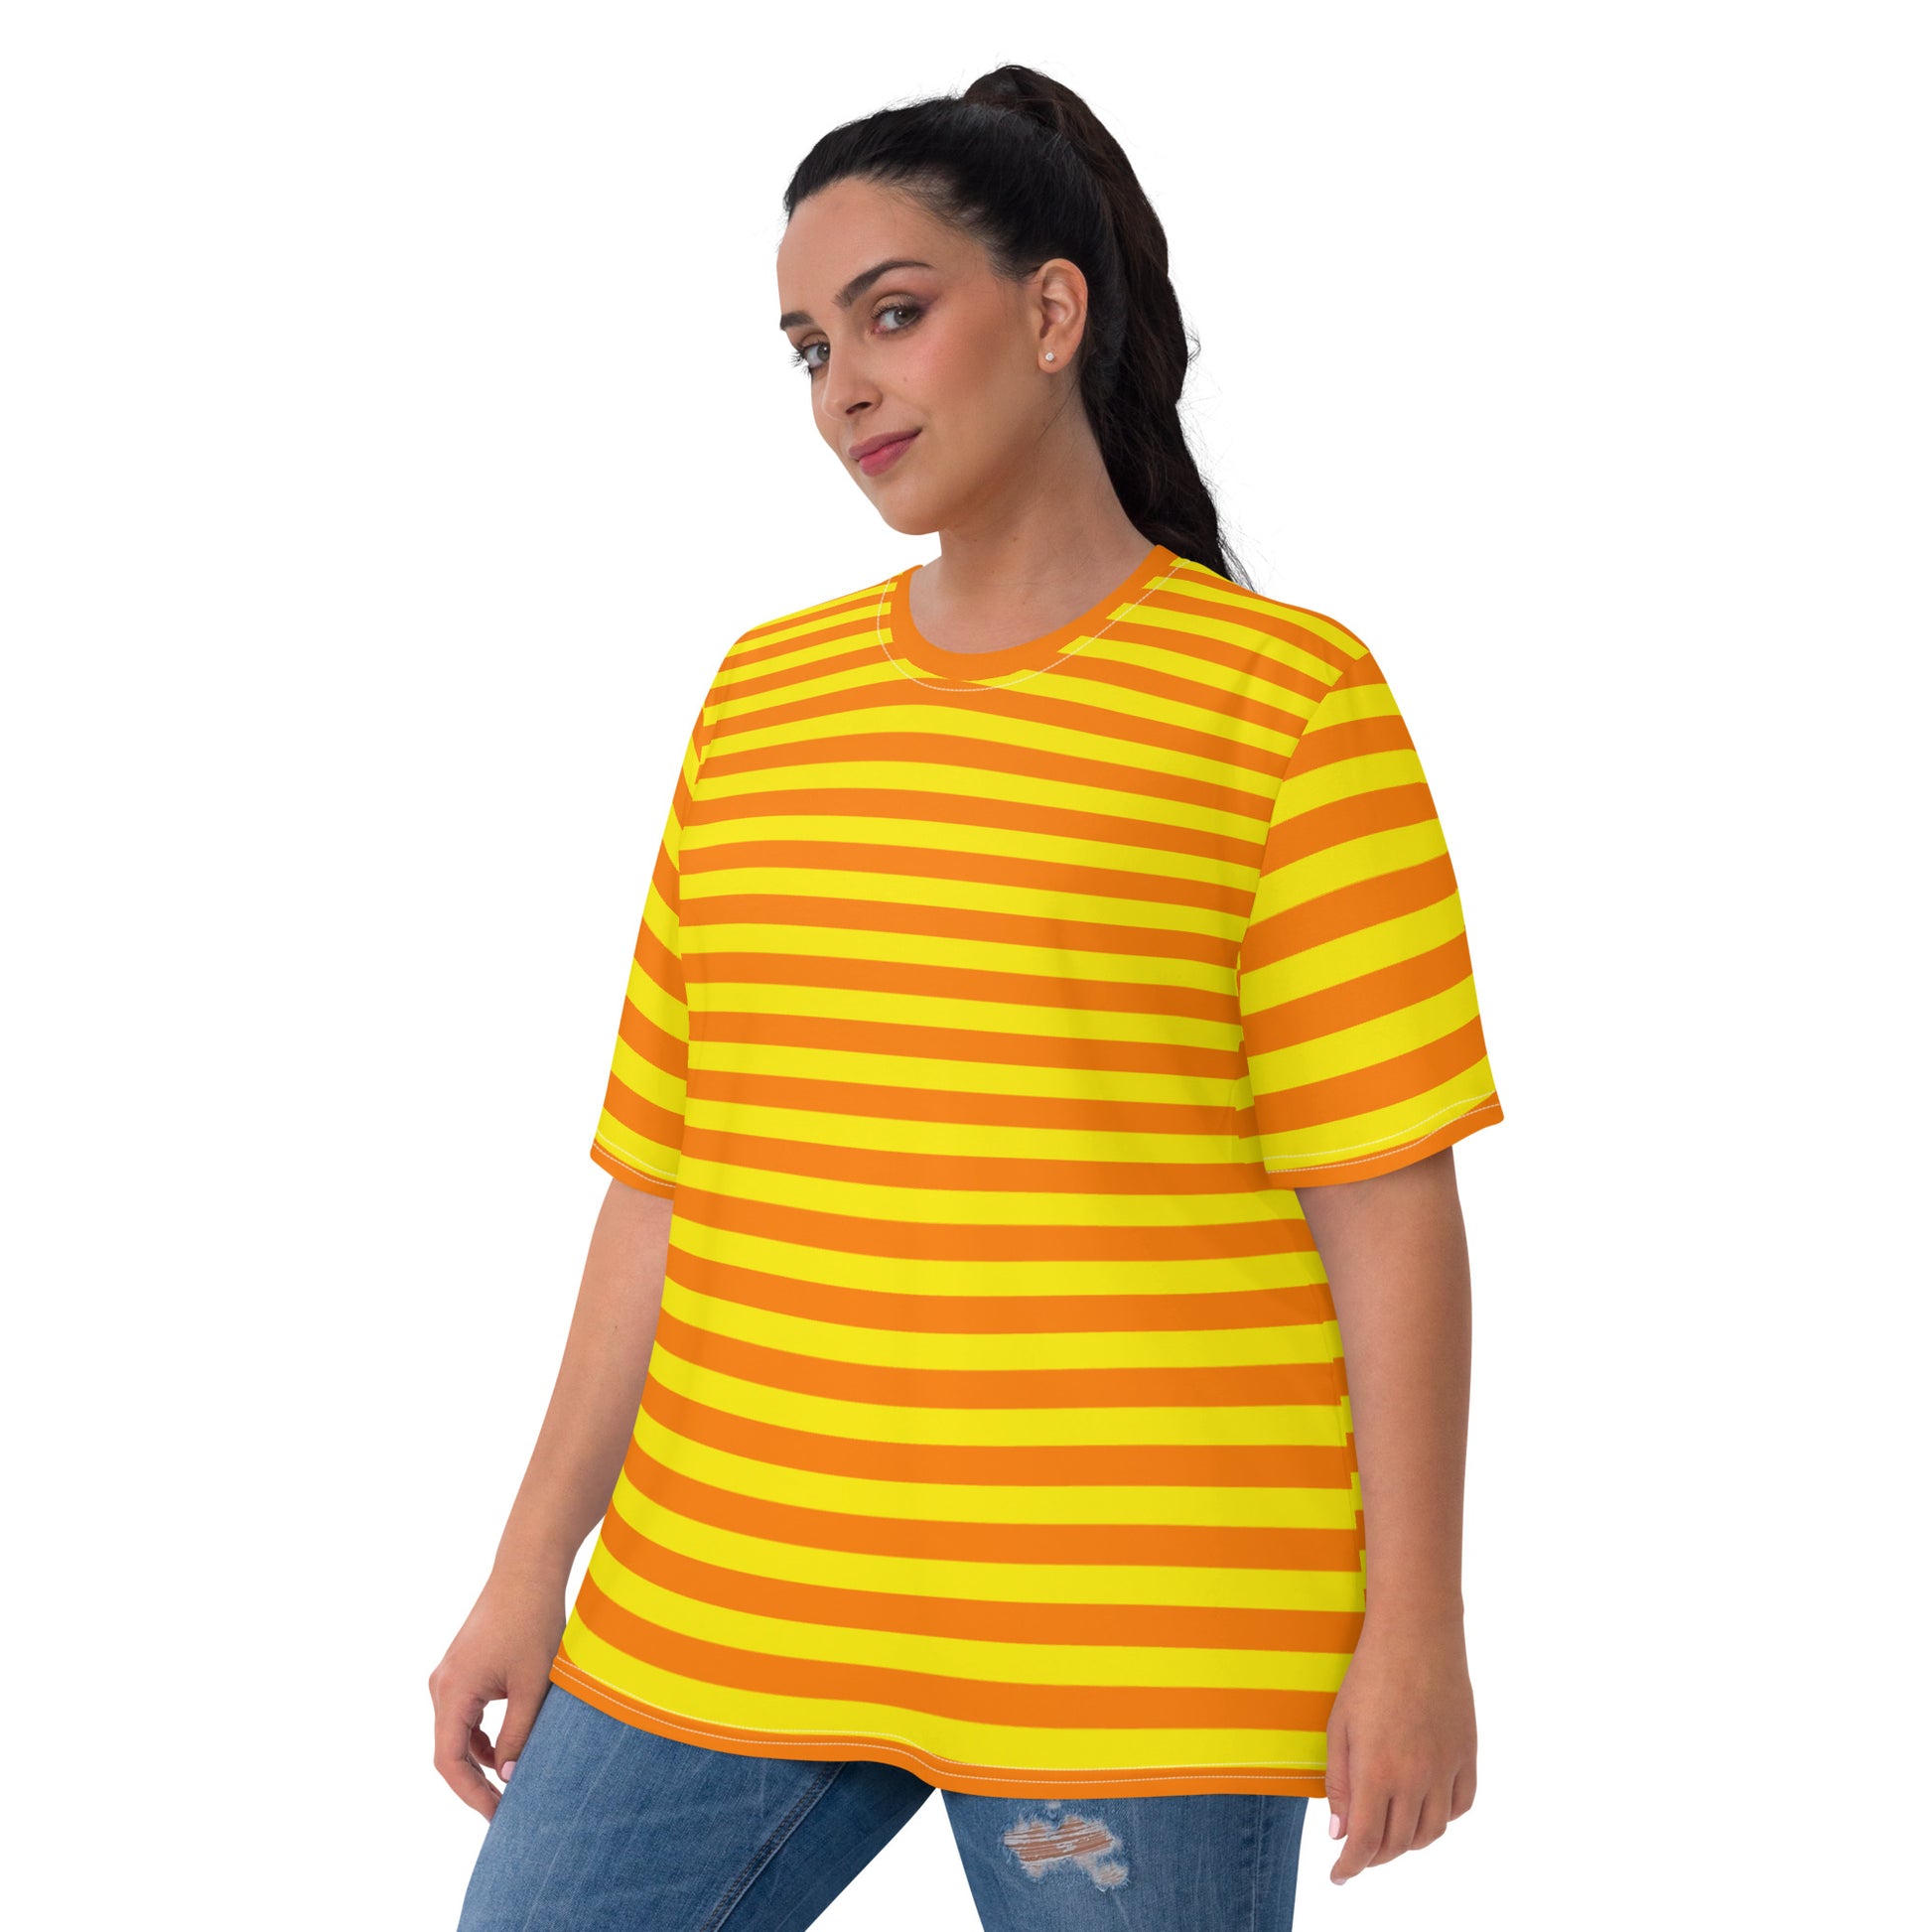 Striped t-shirt in orange and yellow plus size